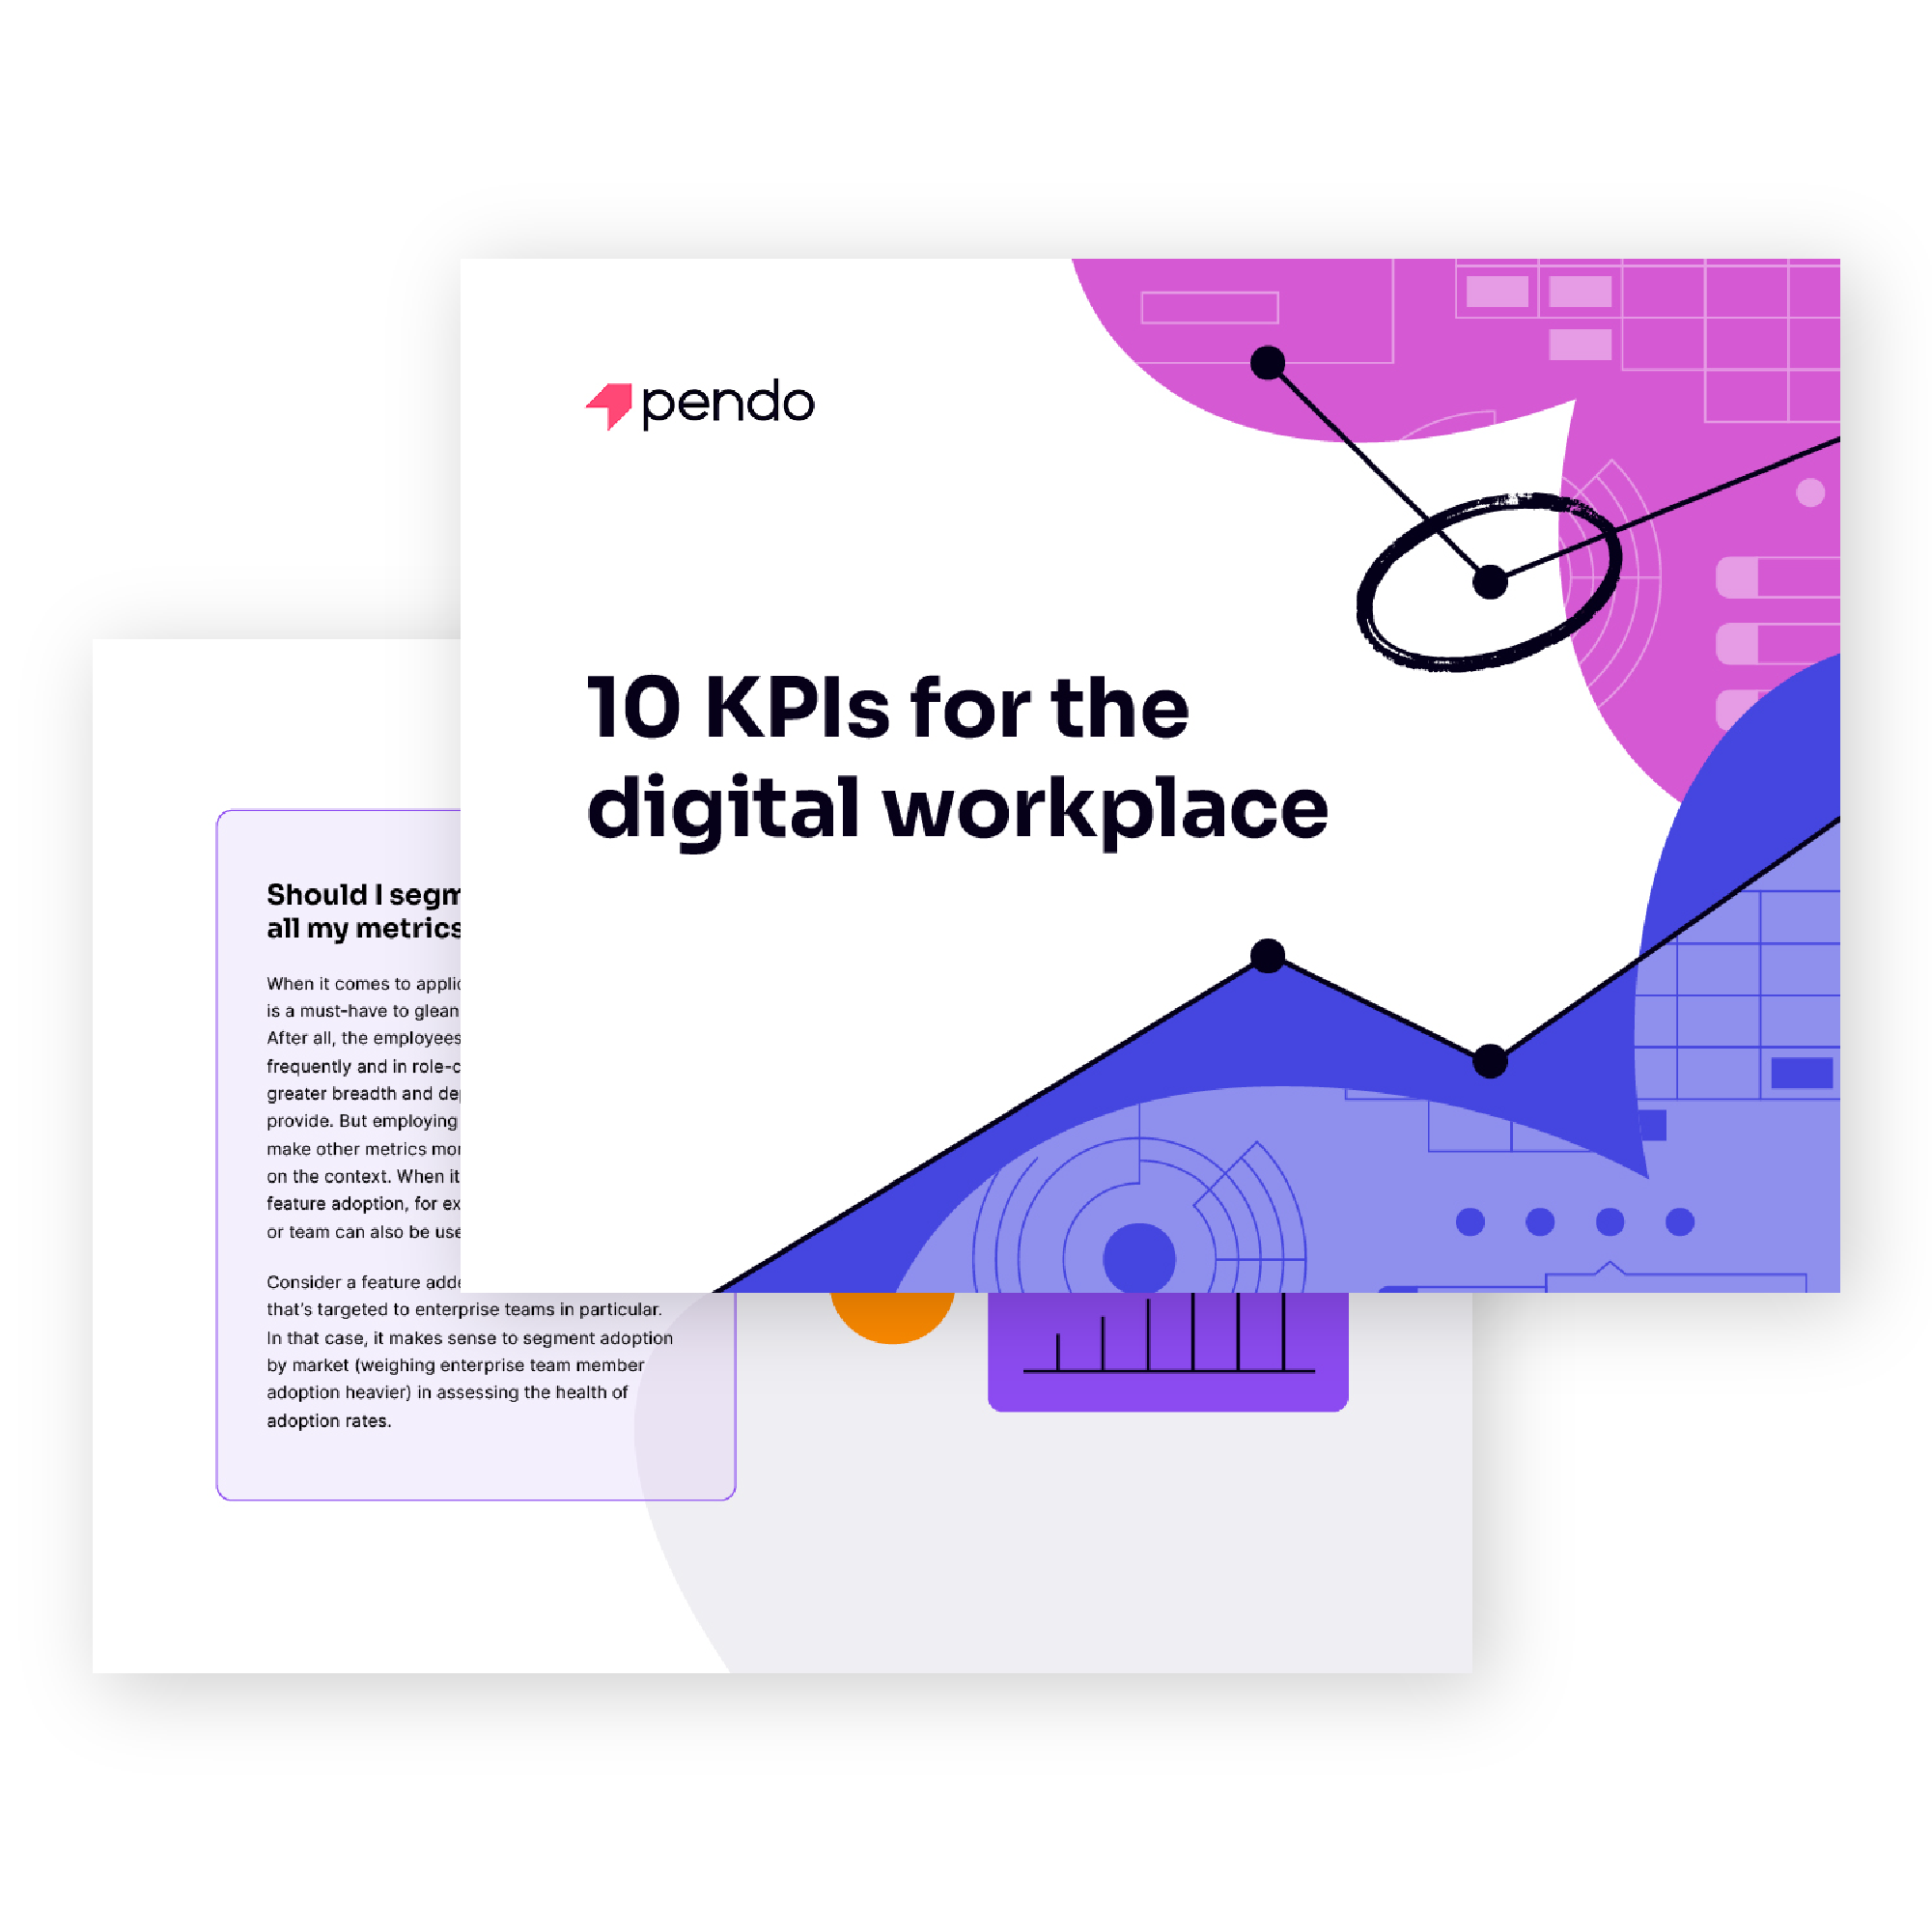 10 KPIs for the digital workplace